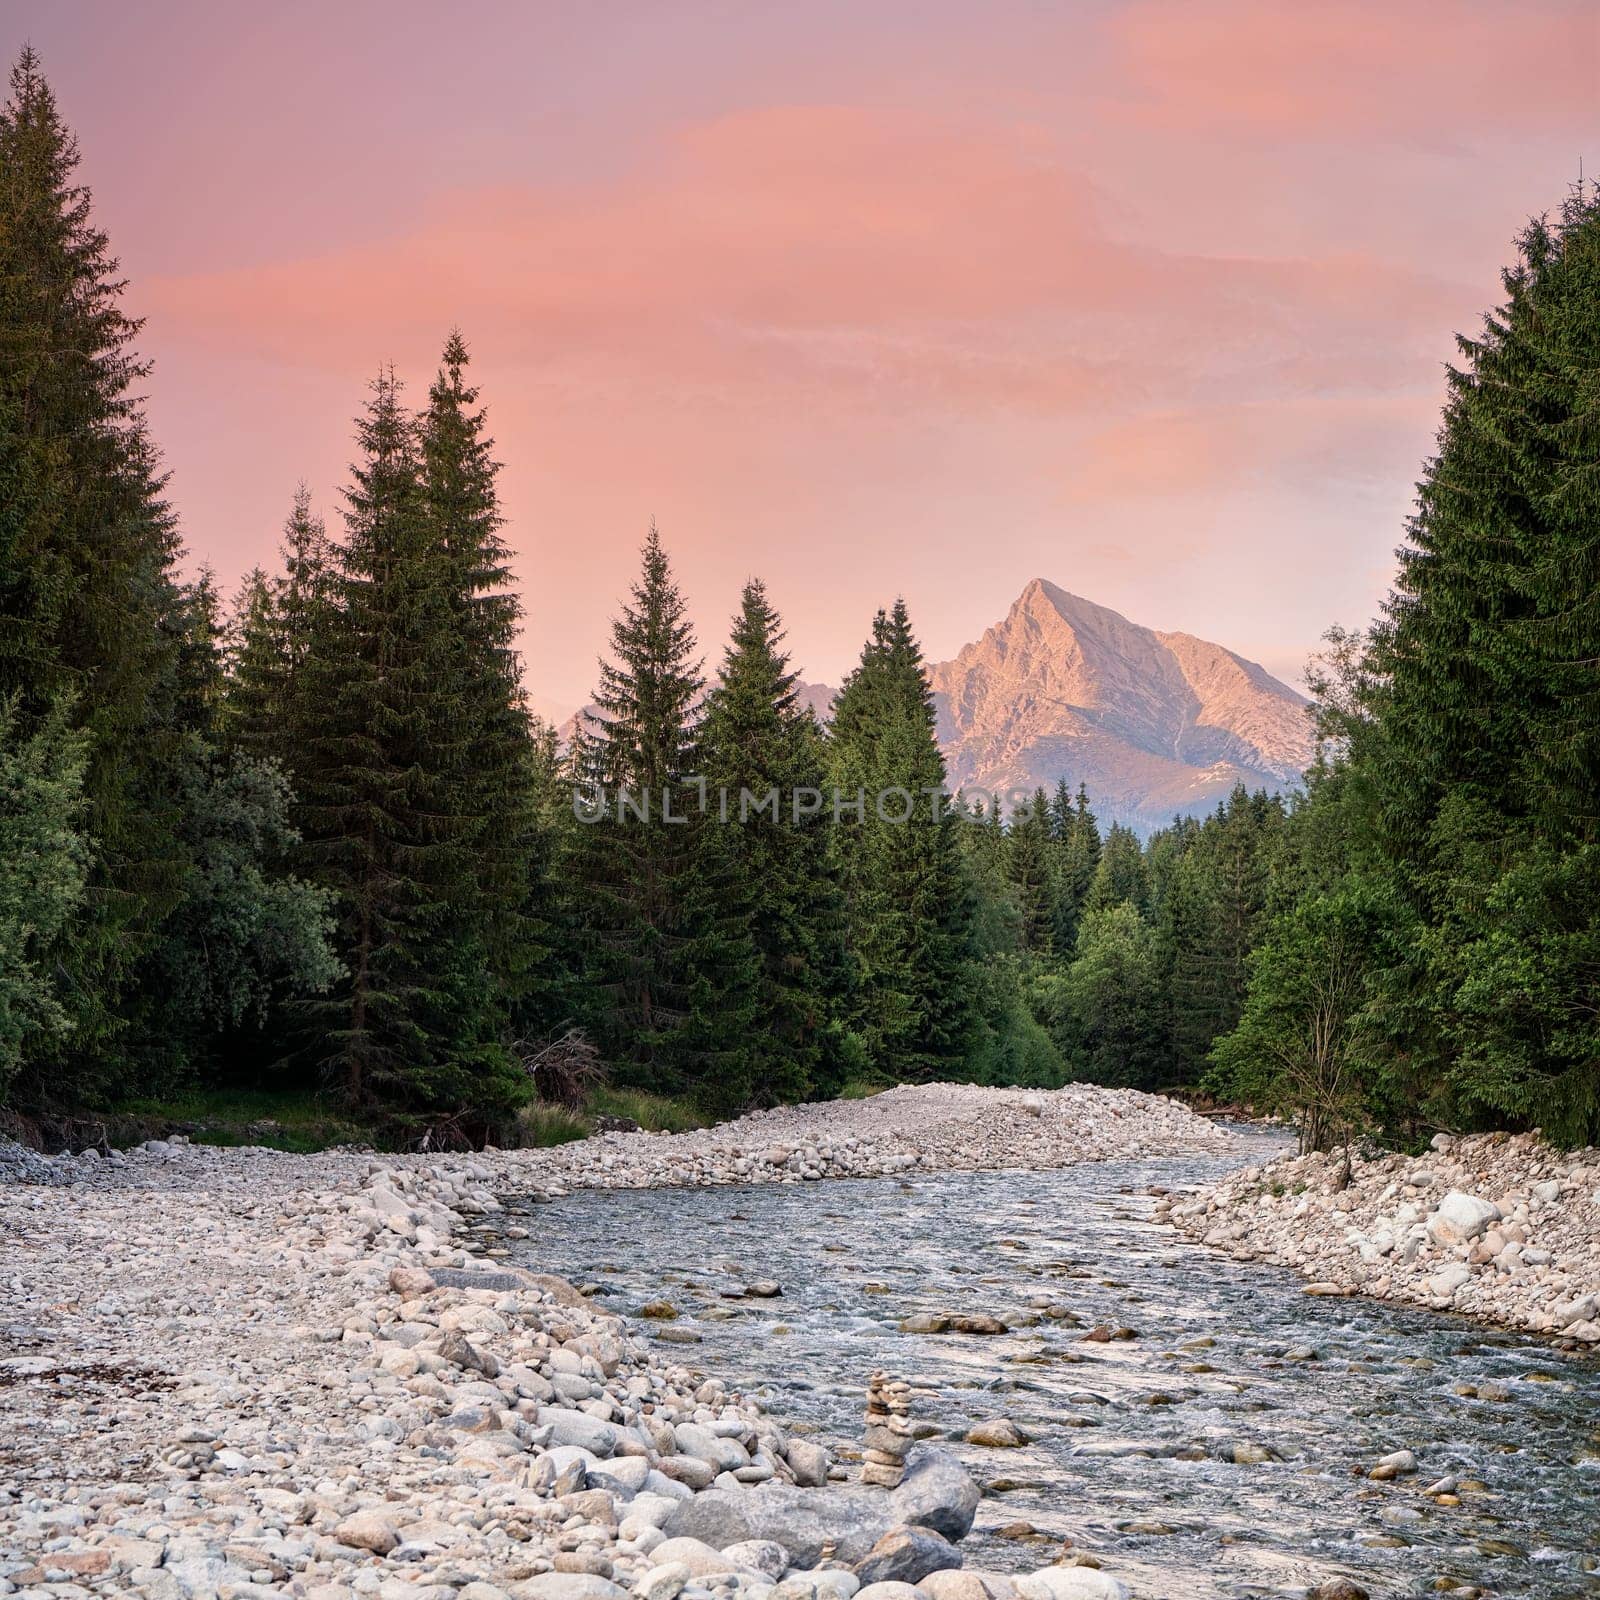 Forest river flowing, coniferous trees on both sides, mount Krivan peak (Slovak symbol) with pink / red clouds above in distance by Ivanko